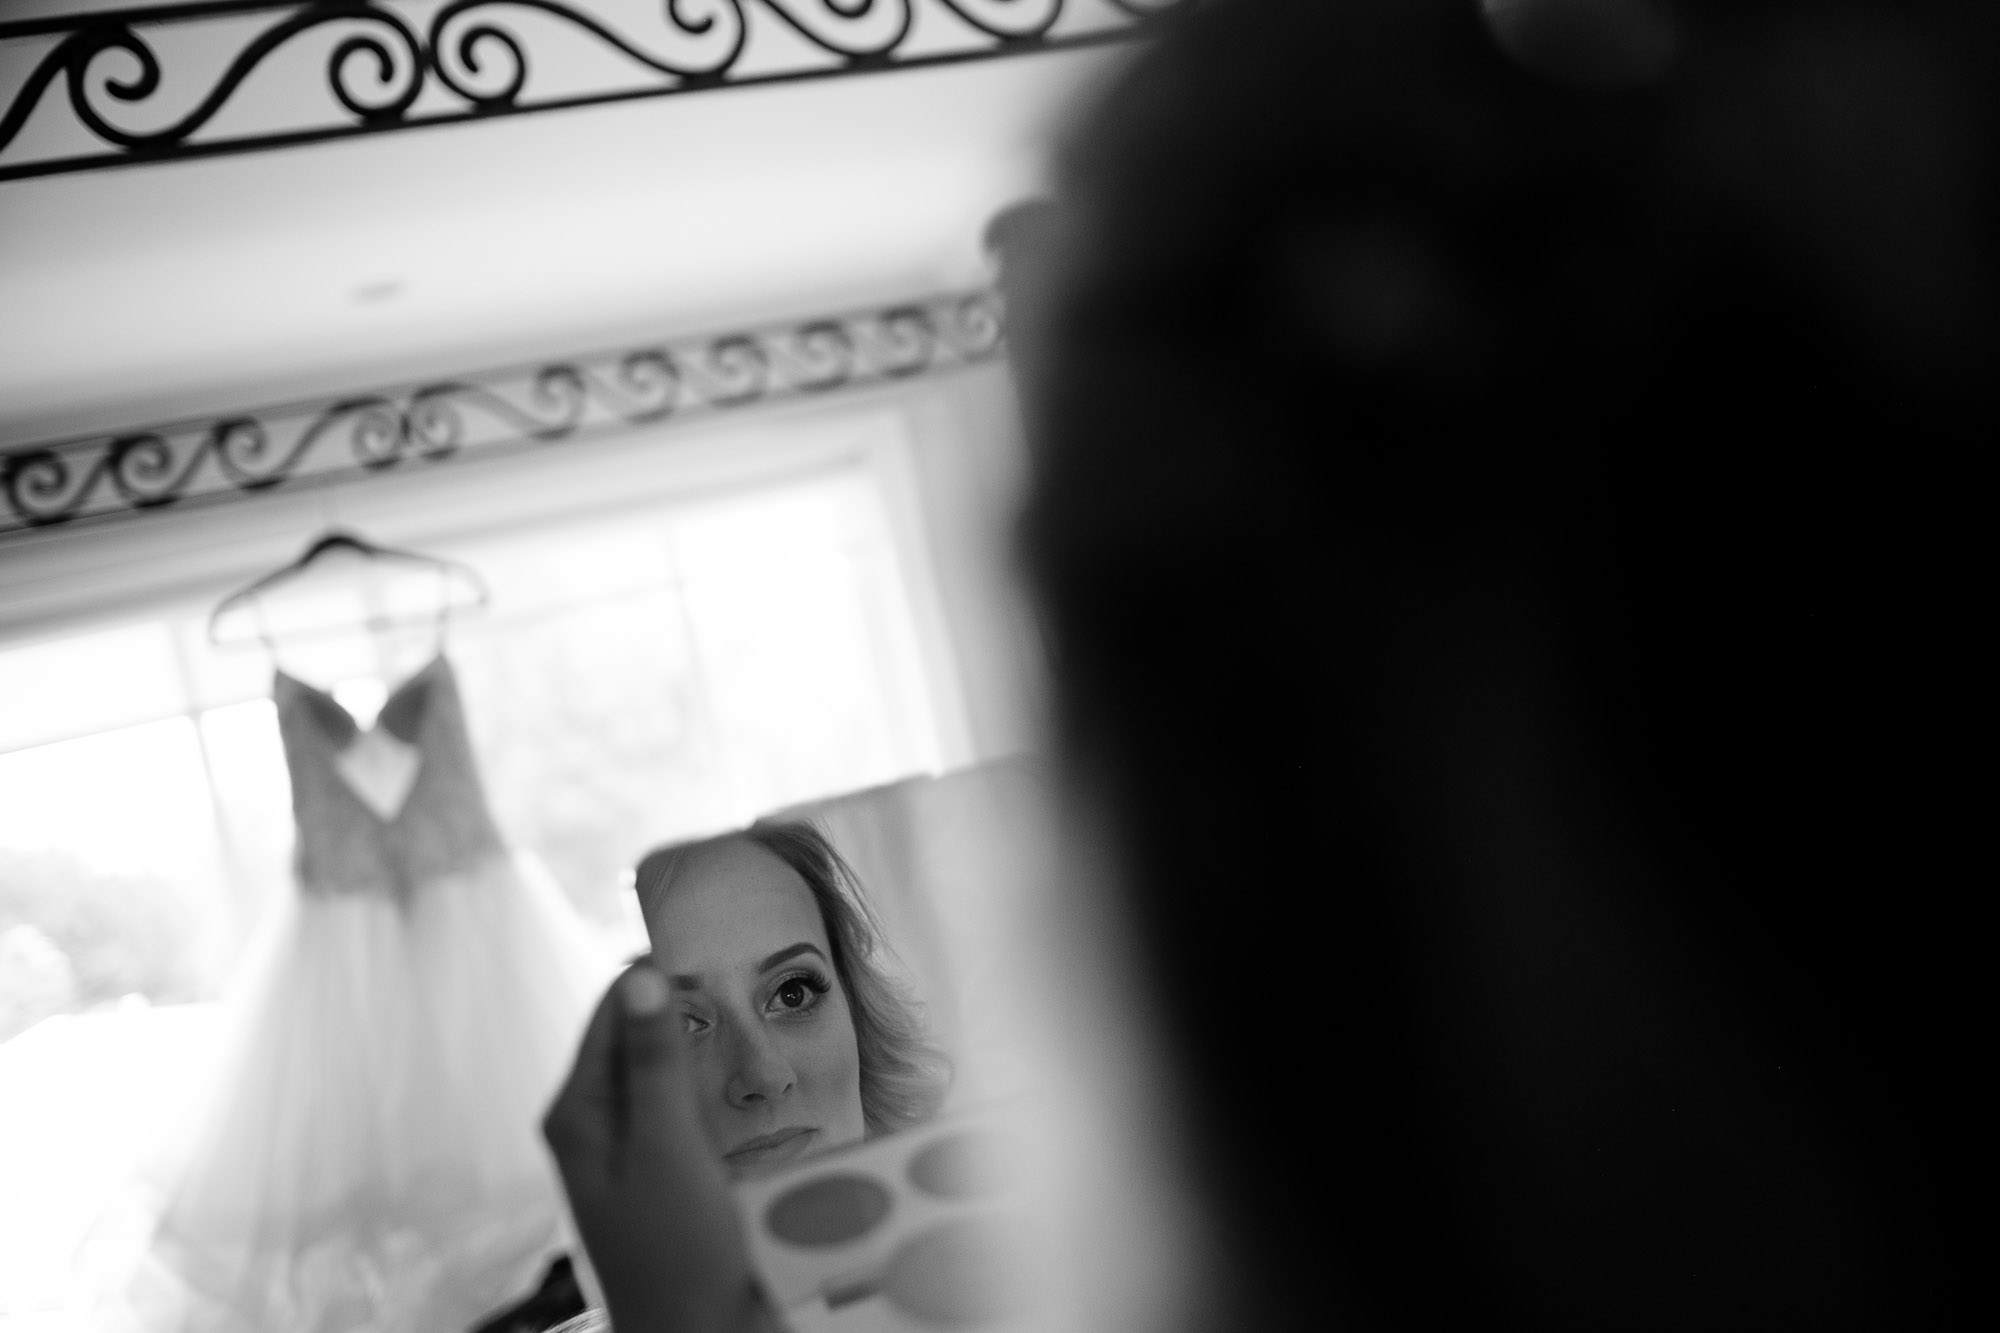  Alex checks her makeup with her wedding dress in the background in this candid black and white wedding photograph. 